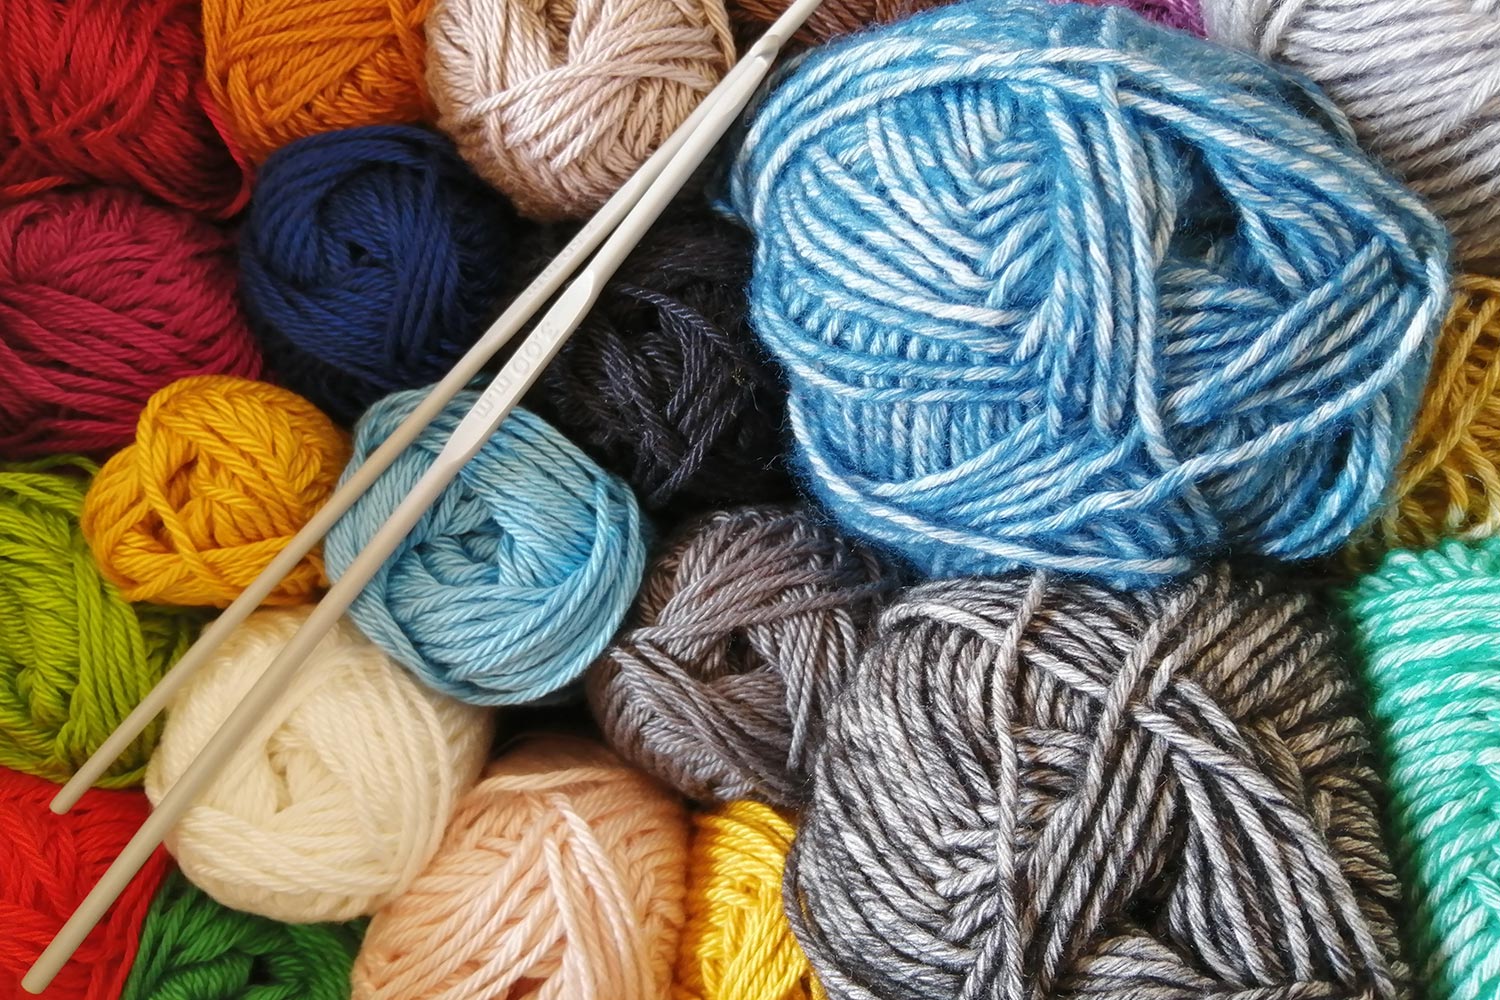 Knitting Makes Me a Better Executive Director